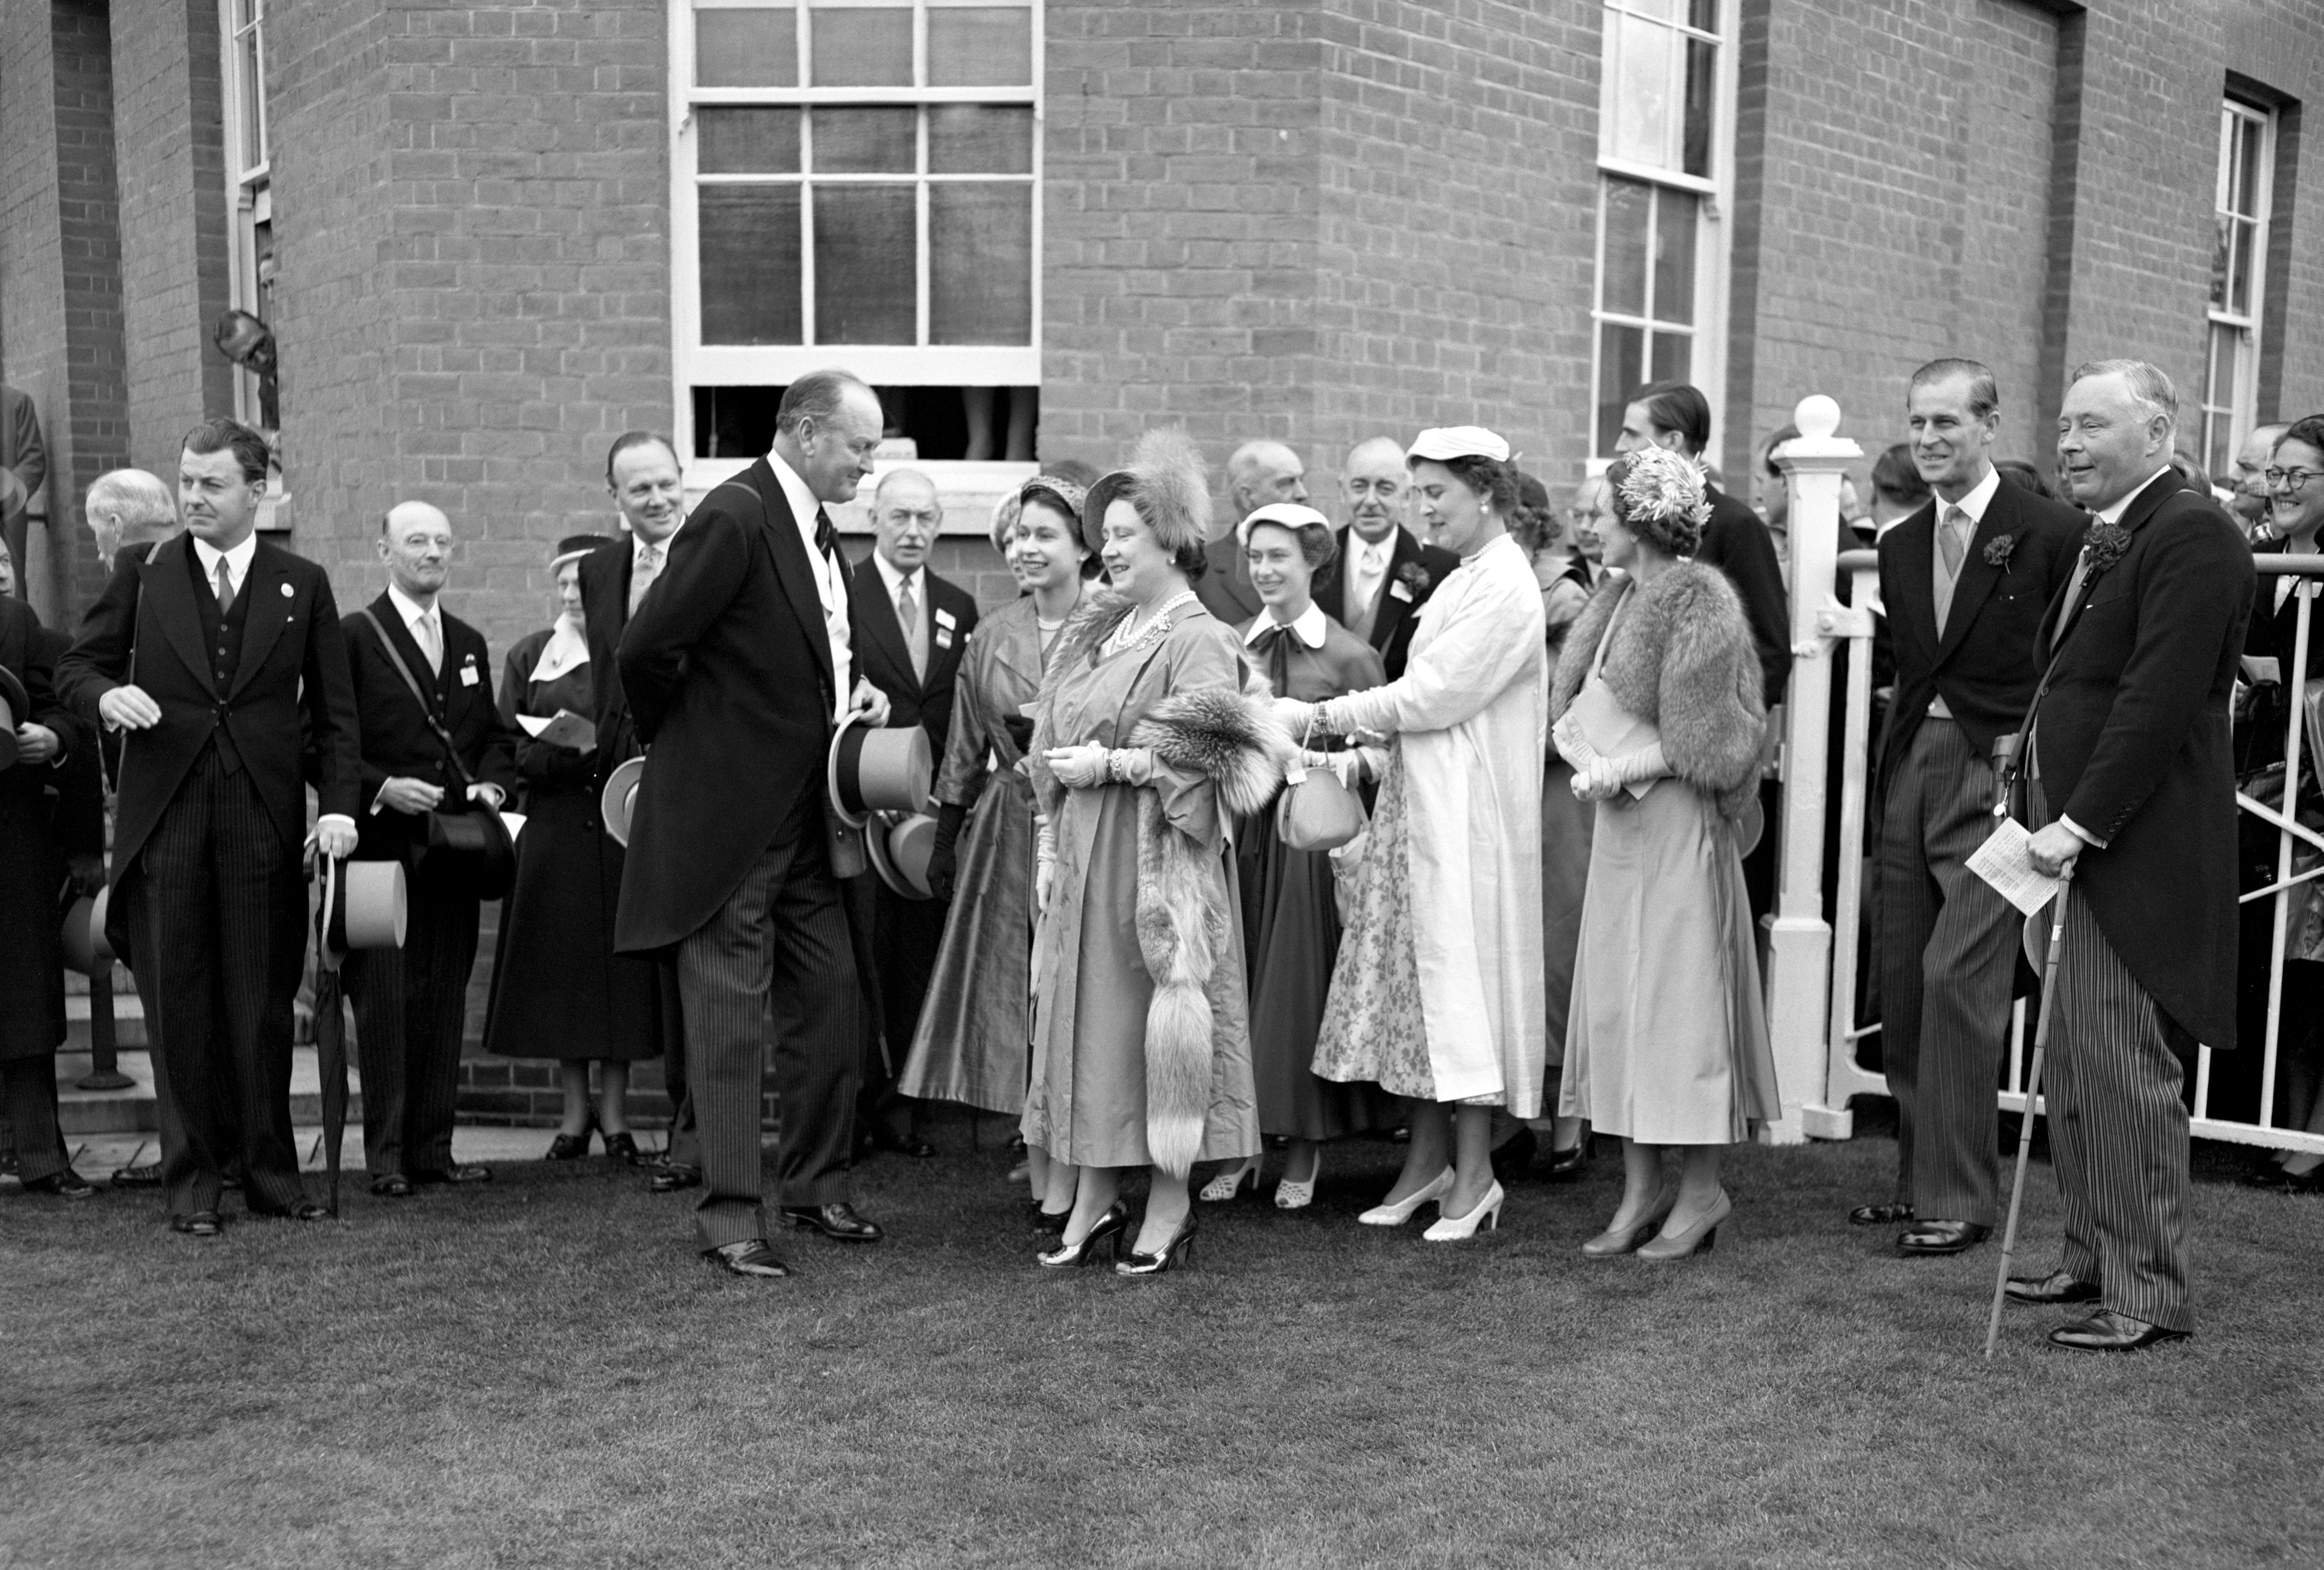 The Queen has had a long-standing interest in horse racing, dating throughout her reign. In 1953 she, alongside the Queen Mother, Princess Margaret, the Duchess of Kent, the Duchess of Gloucester, the Duke of Edinburgh and the Duke of Norfolk congratulated trainer Captain C. Boyd-Rochfort, after the Queen’s horse Choir Boy won the Royal Hunt Cup at Royal Ascot (PA Archive)